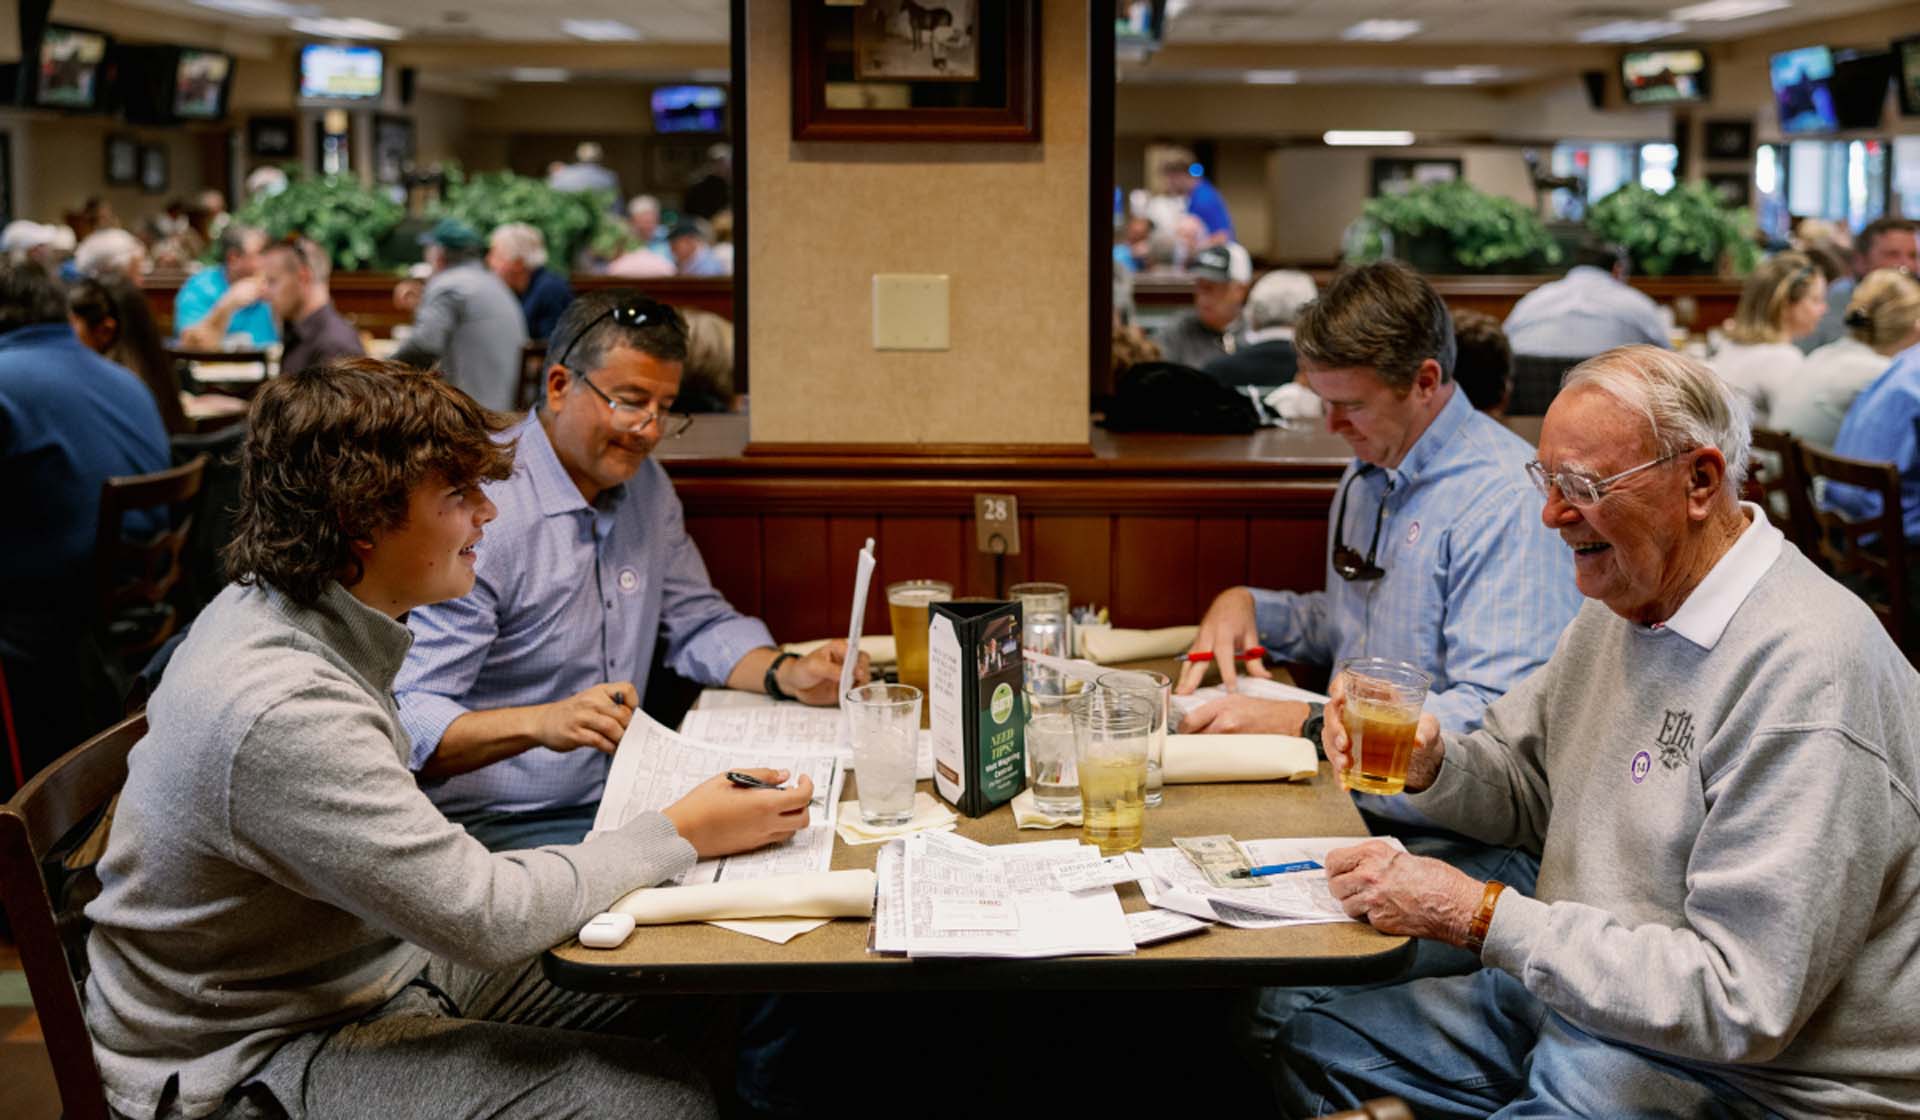 A candid photo of four men from the same family enjoying a meal together in the Equestrian Room.